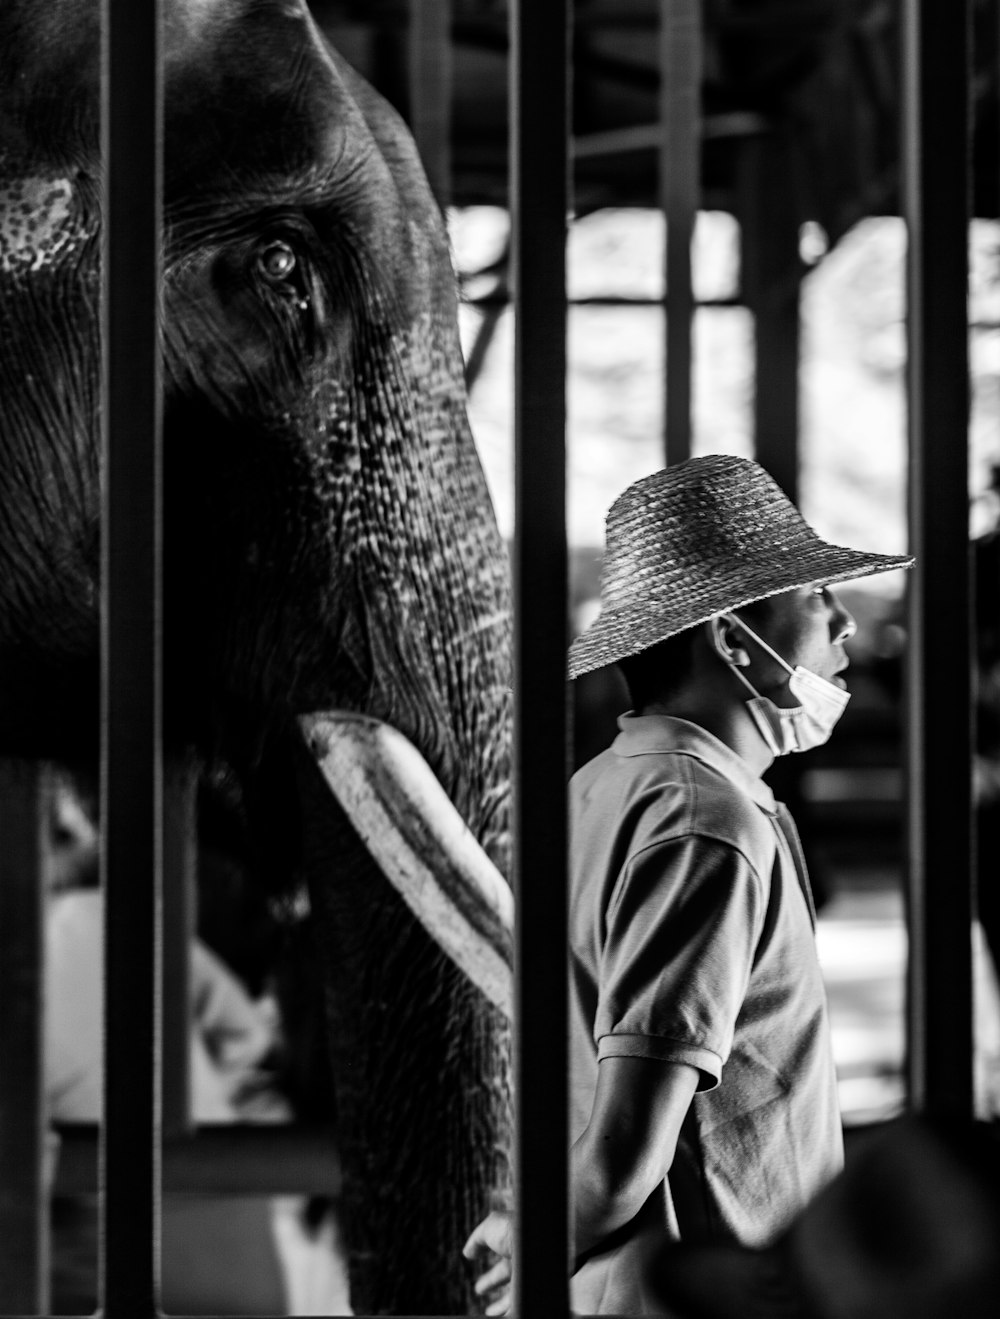 a man in a straw hat standing next to an elephant